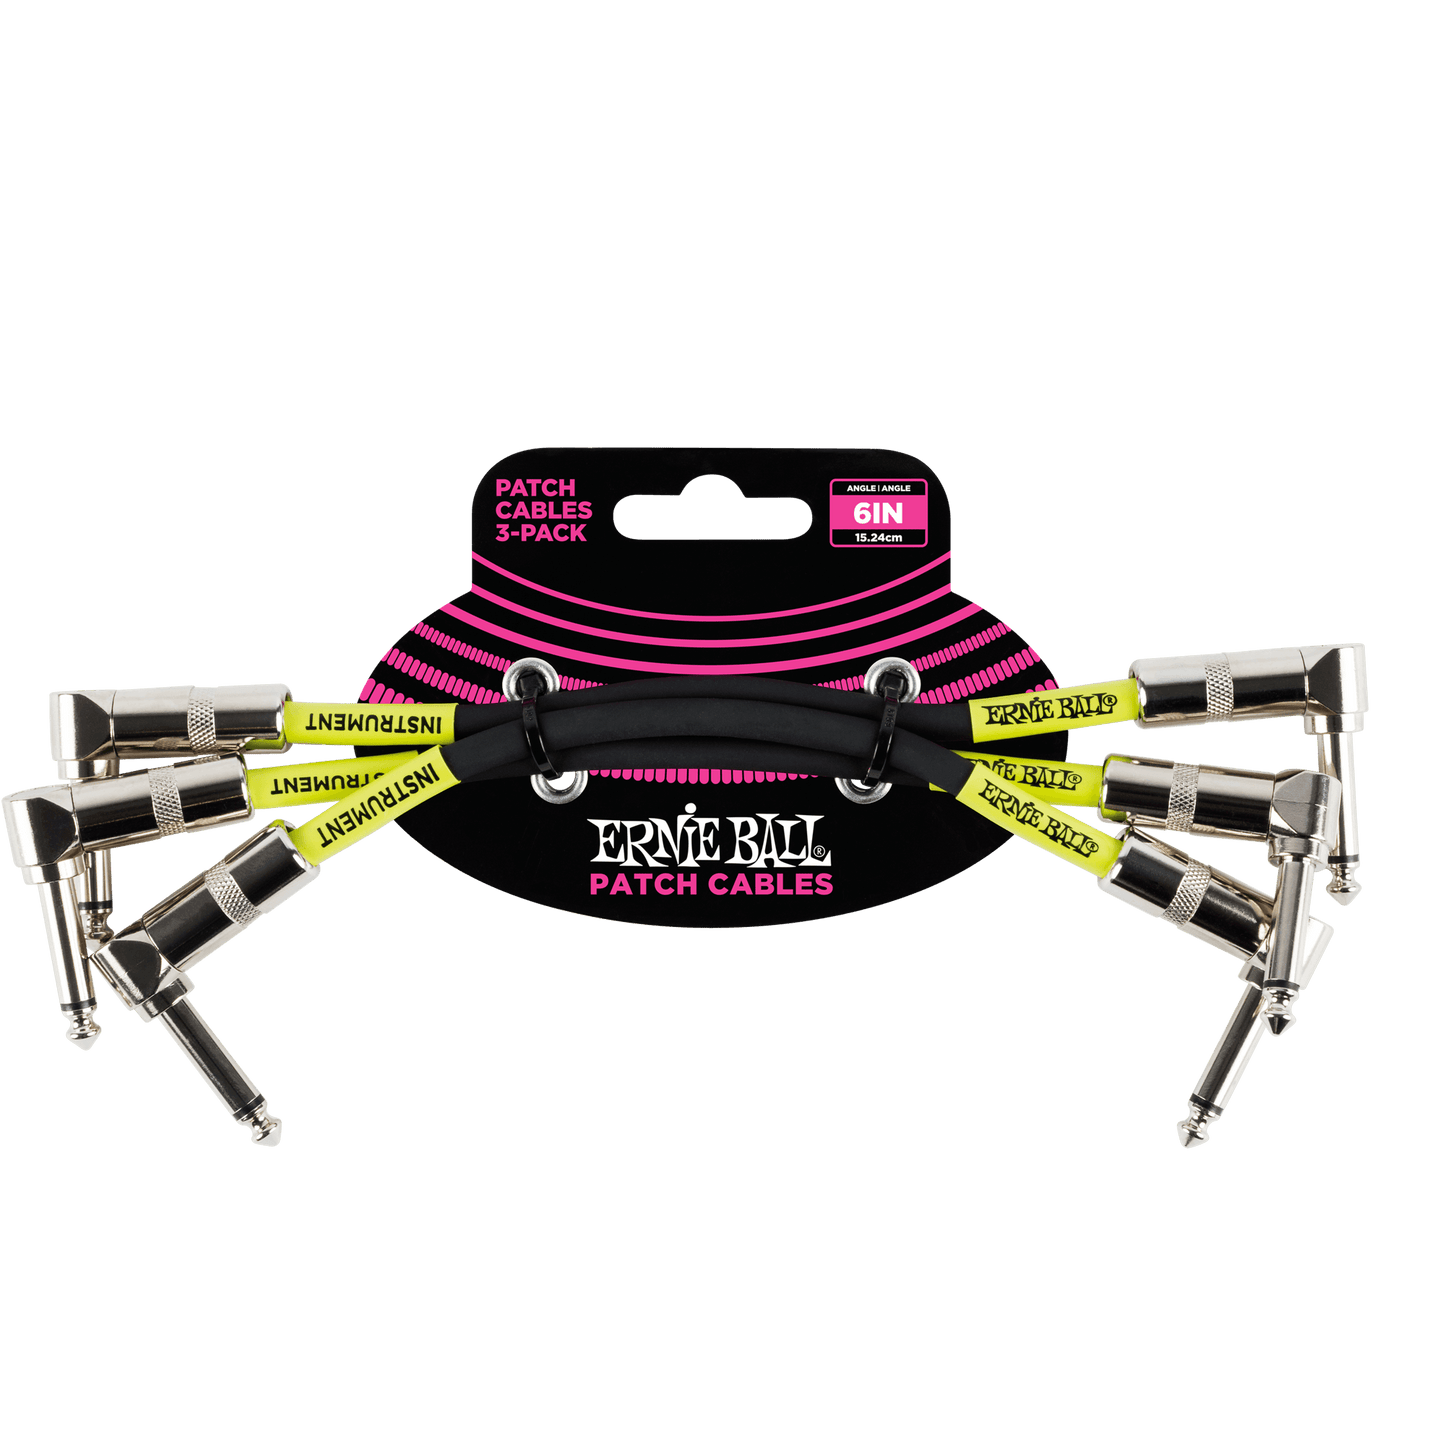 Ernie Ball 6" Angle/Angle Patch Cable - 3 Pack